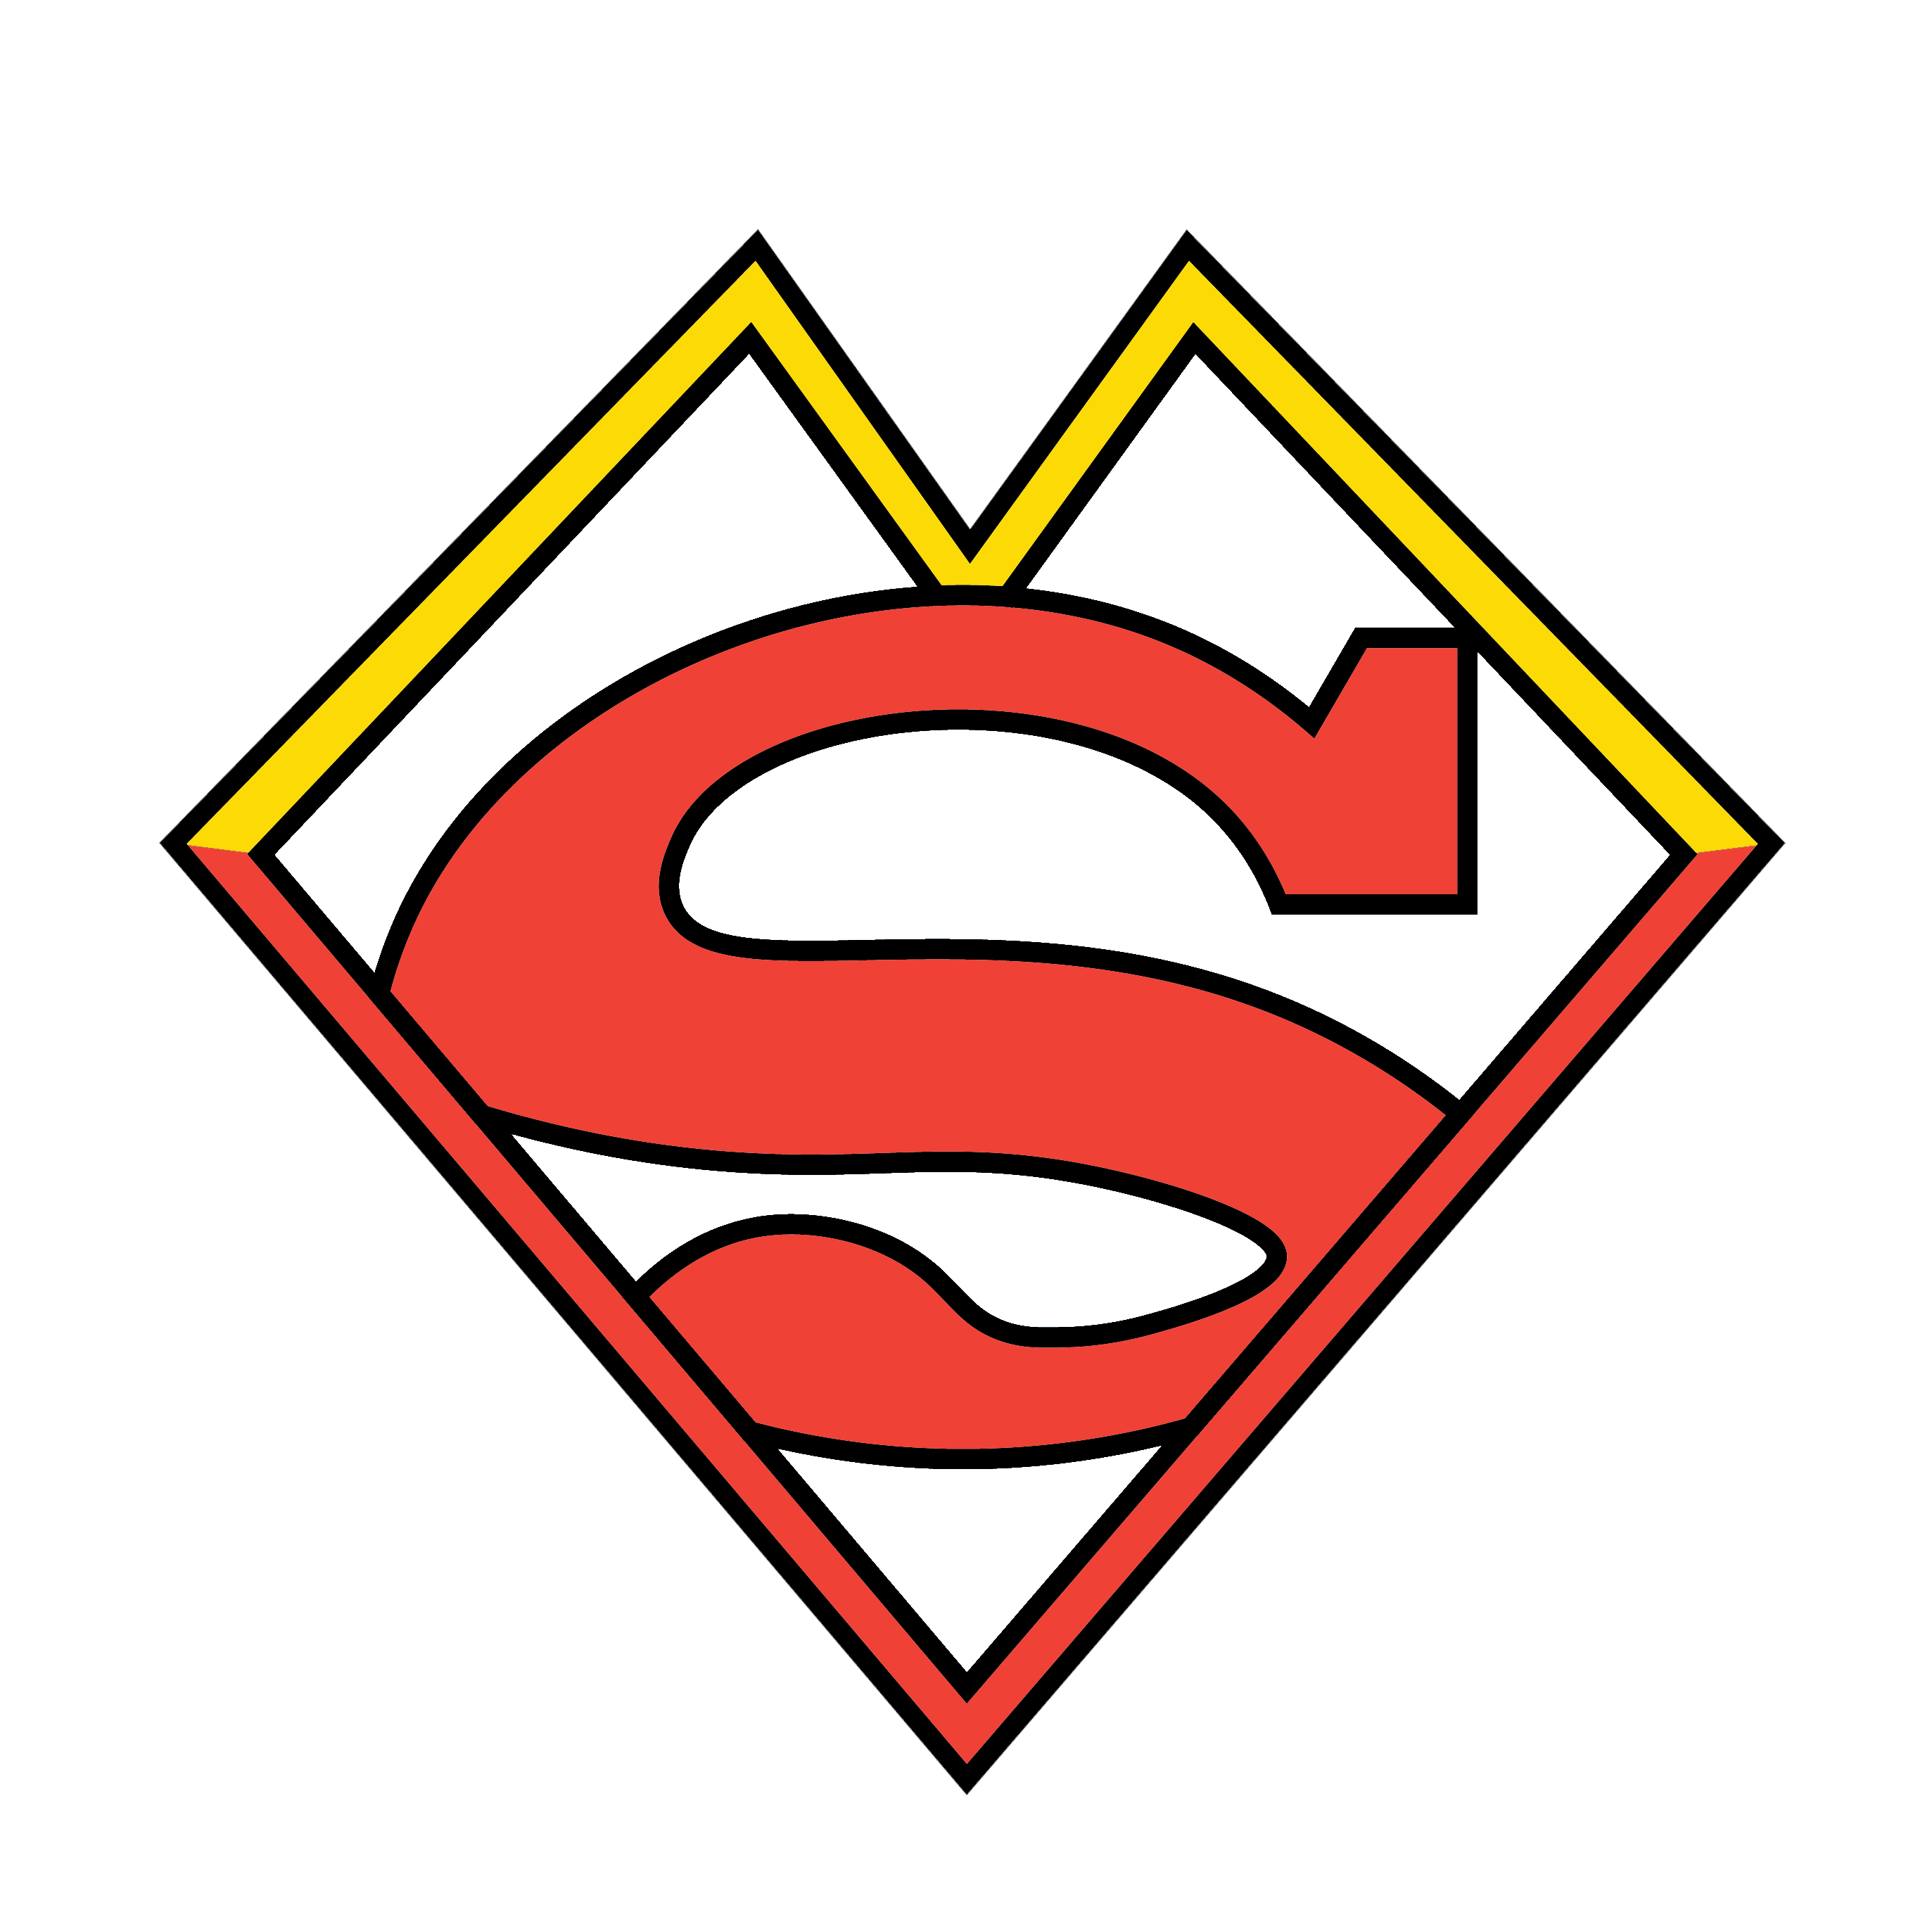 The logo is a combination of the S and V letters, similar to Superman's costume